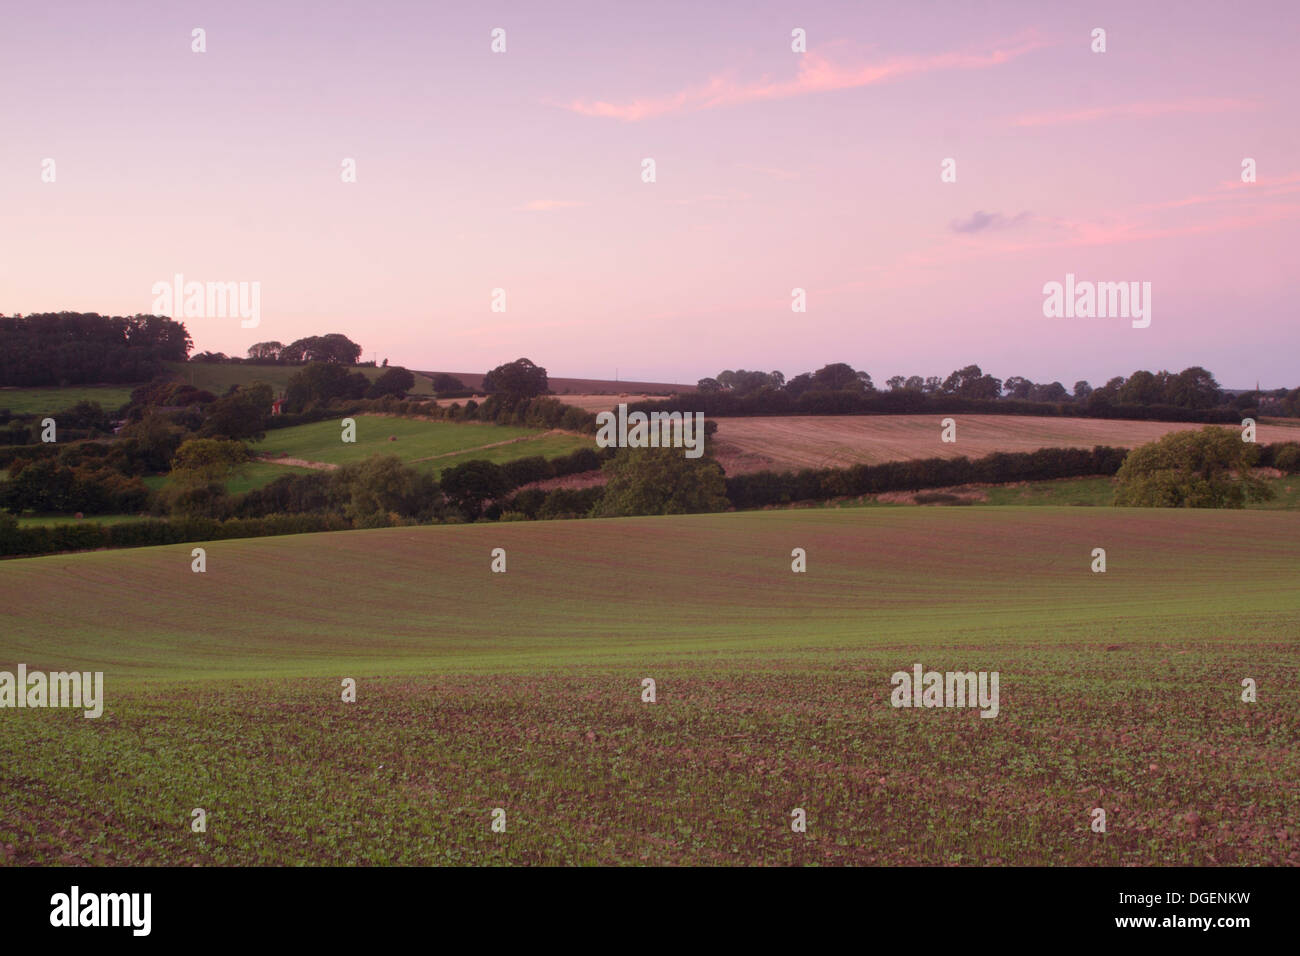 View of arable farmland with newly planted crop, at dusk, Thorner, West Yorkshire, England, UK, September Stock Photo